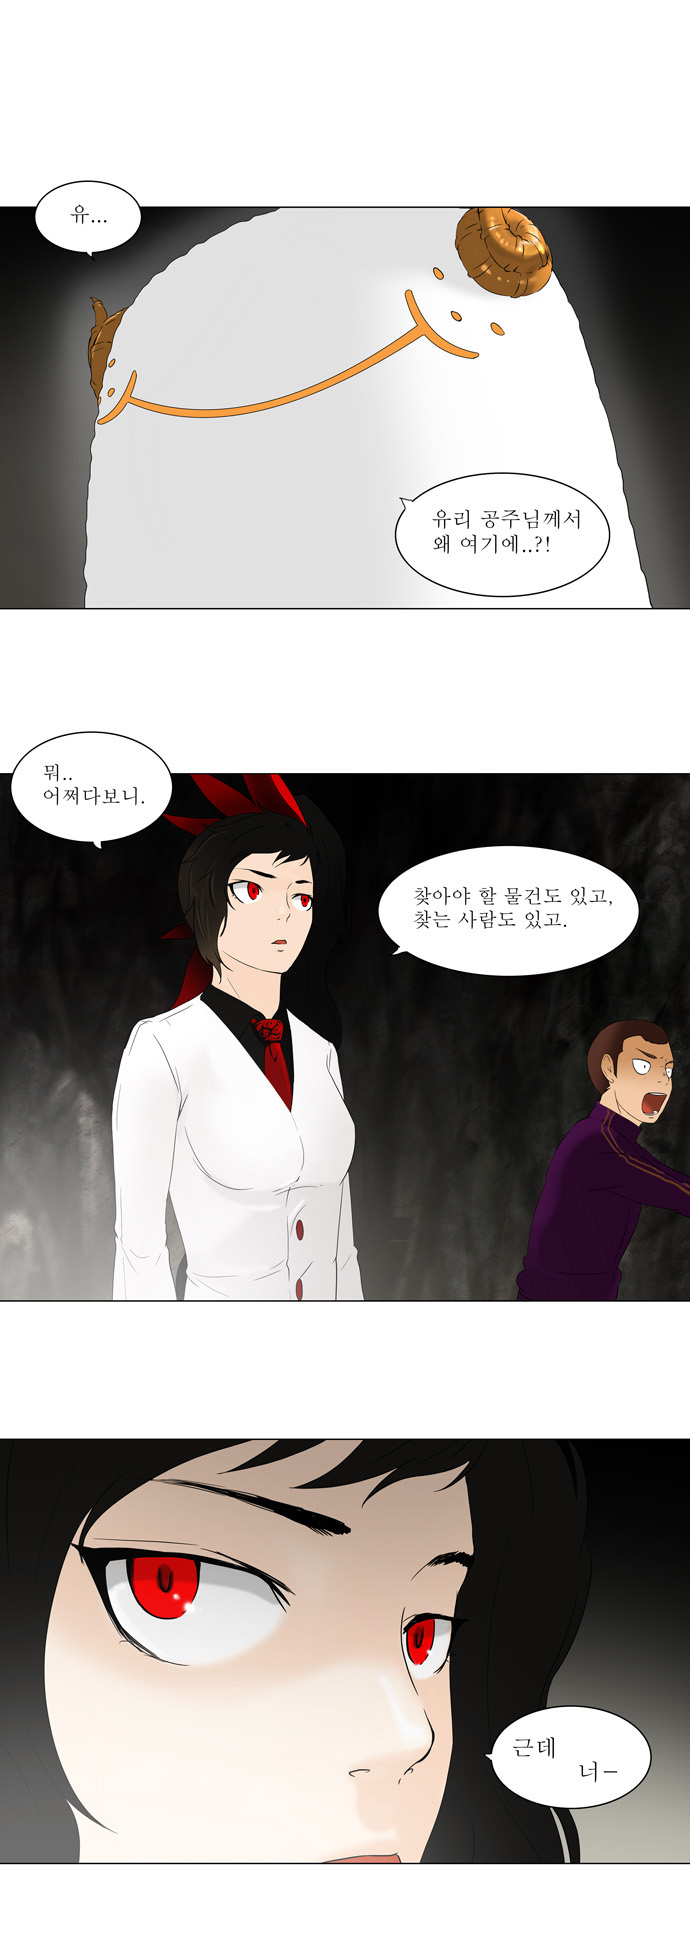 Tower of God - Chapter 70 - Page 1